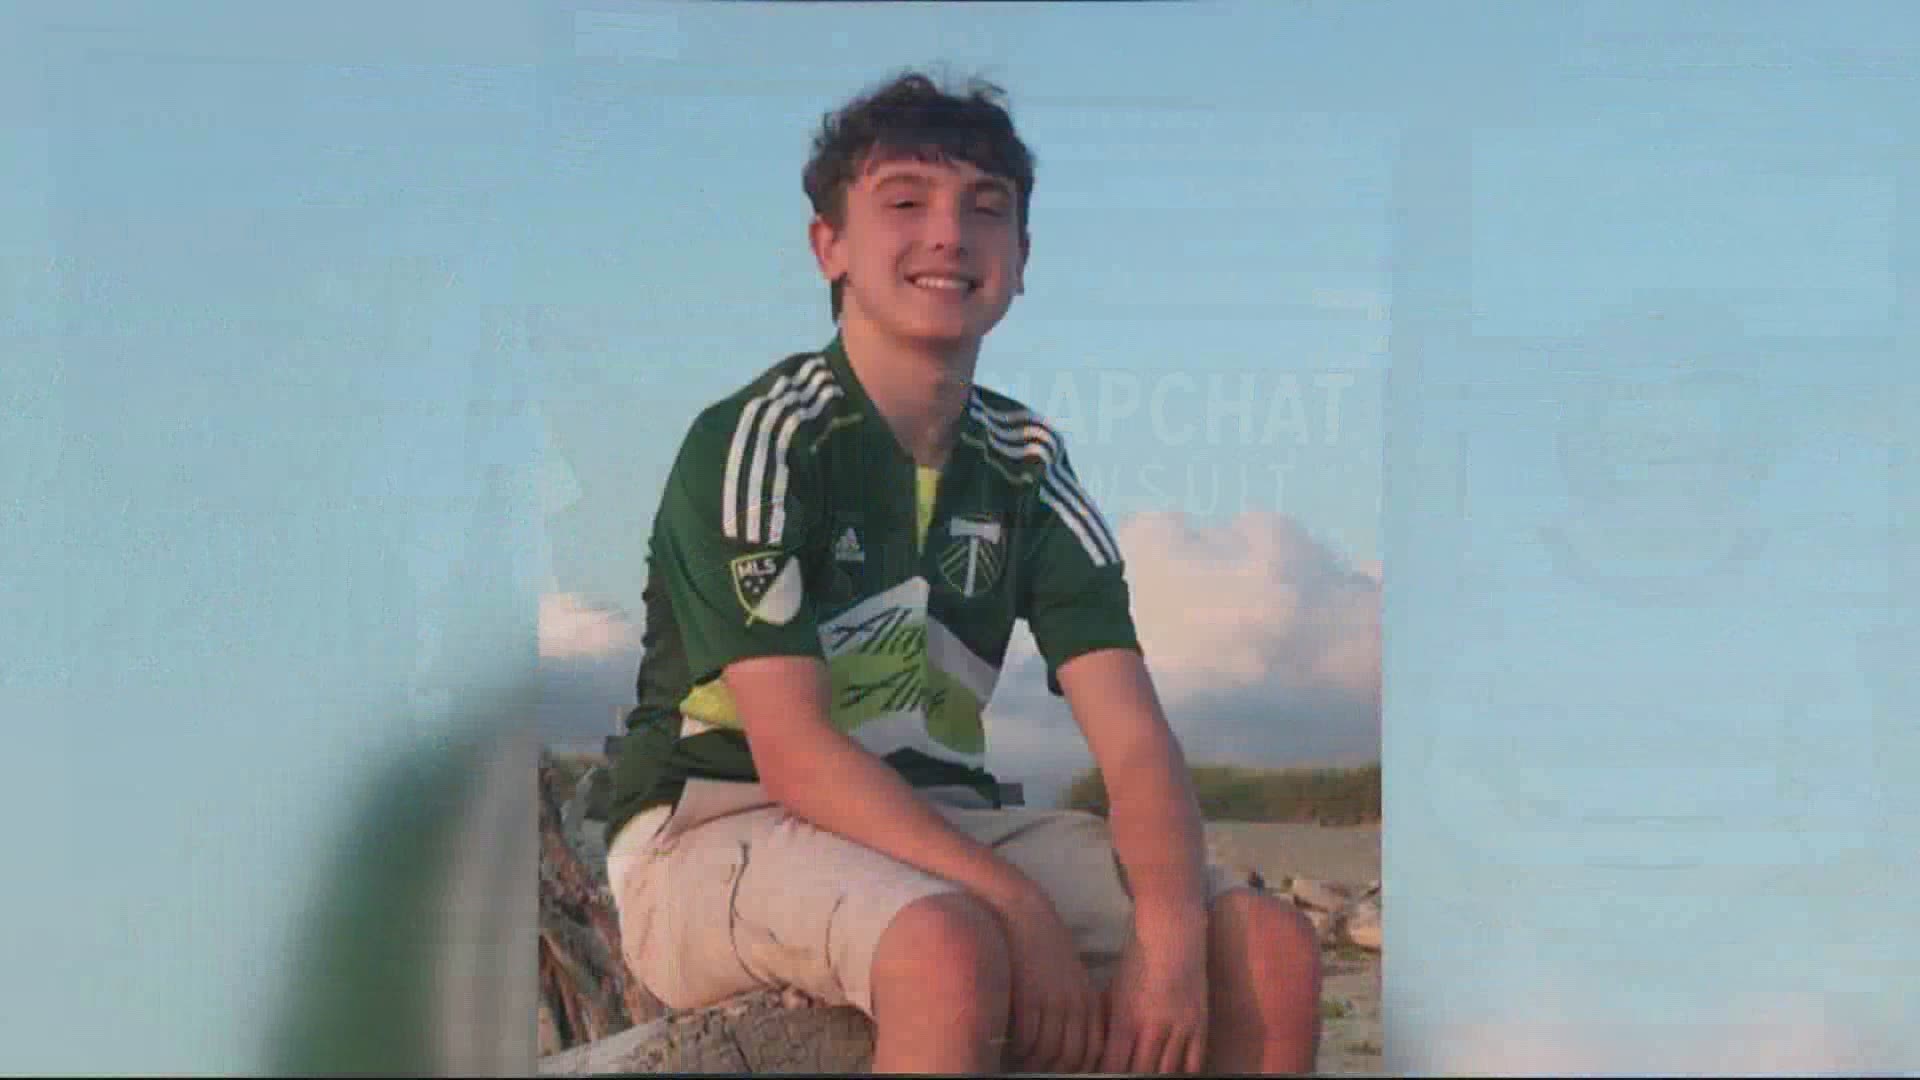 The parents of a Lake Oswego teen who took his life last year filed a lawsuit against Snapchat. Joe Raineri reports.